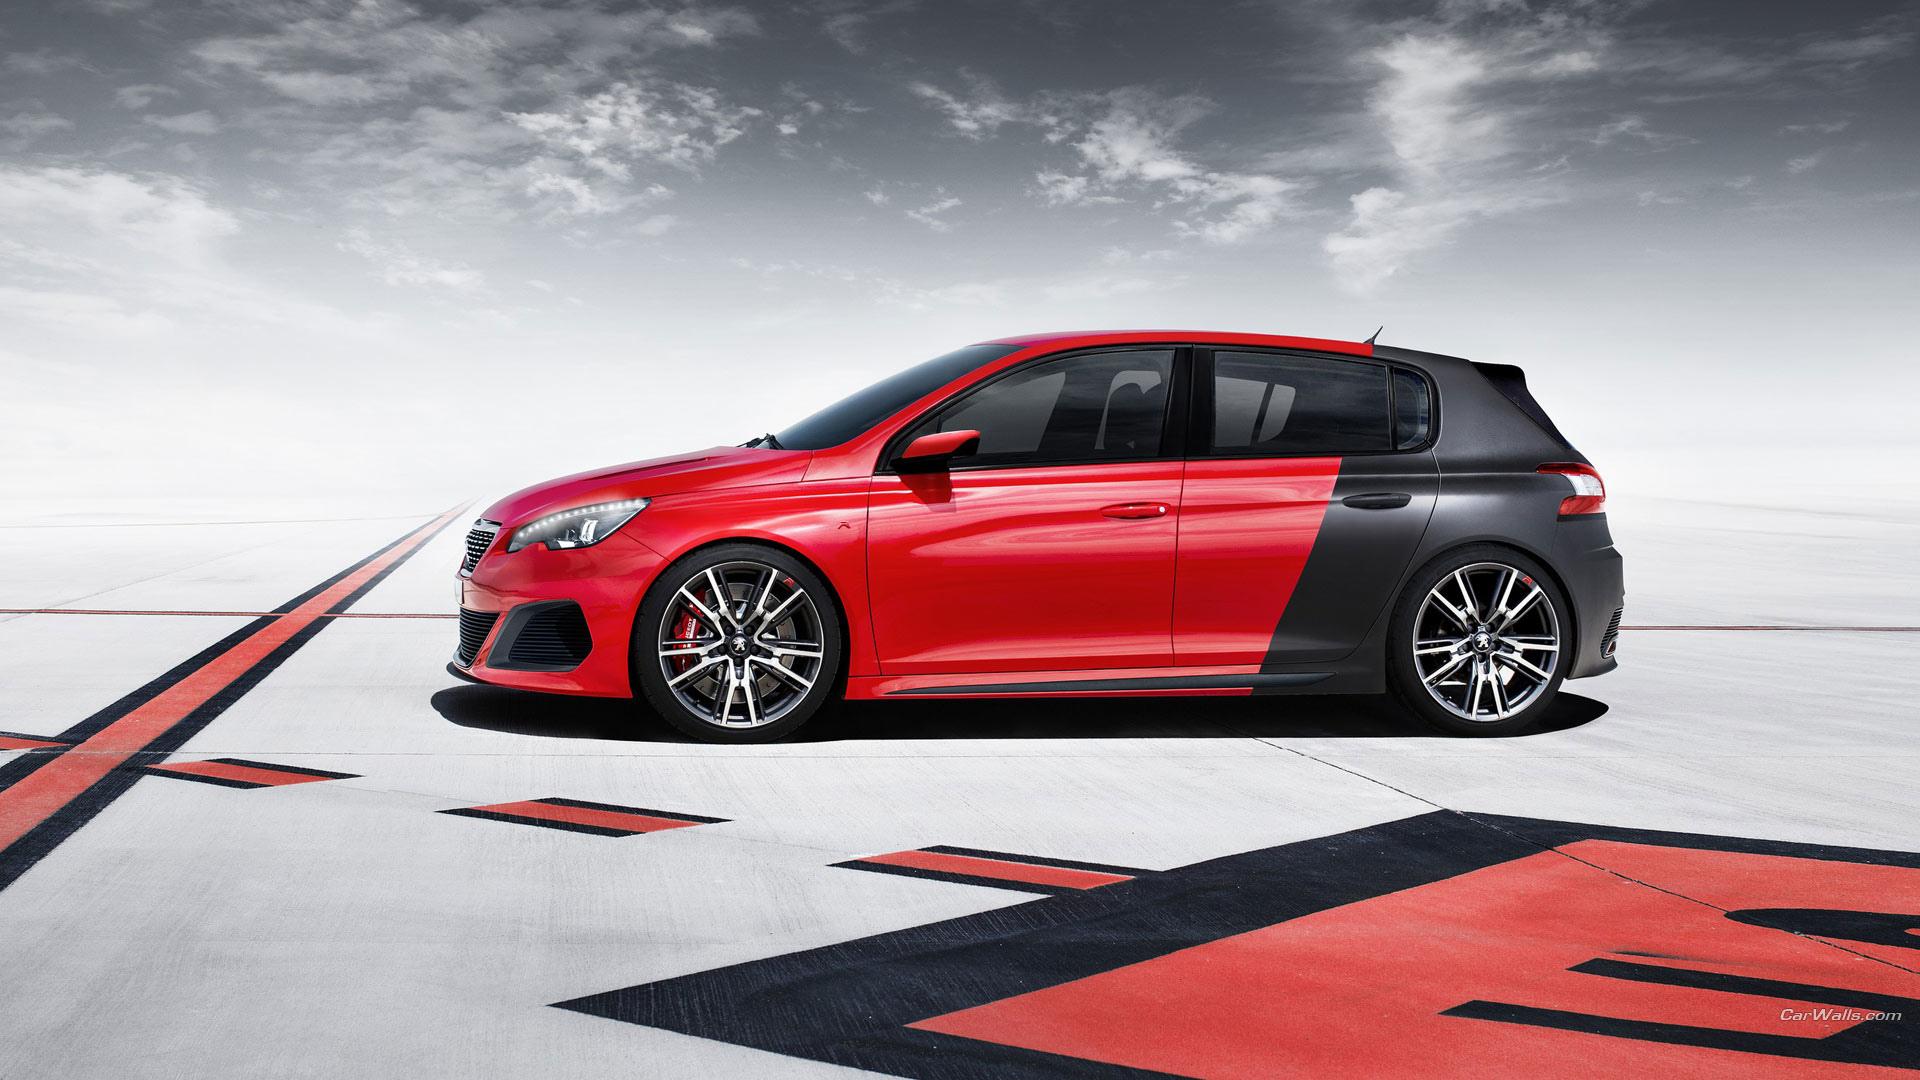 2013 Peugeot 308 R Concept wallpapers HD quality